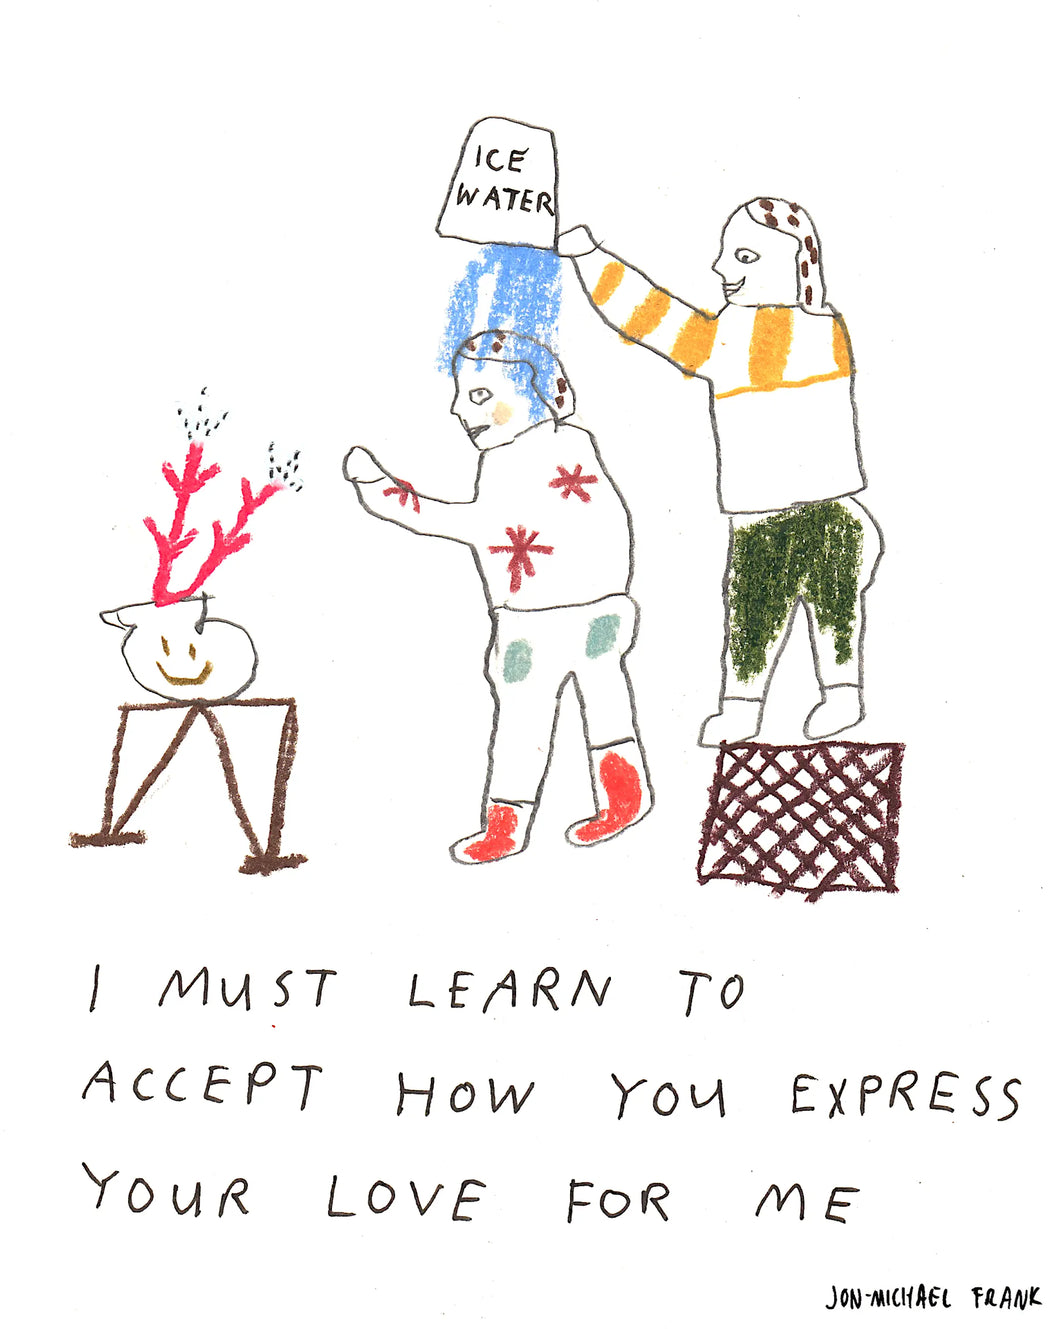 Learn to Accept Love